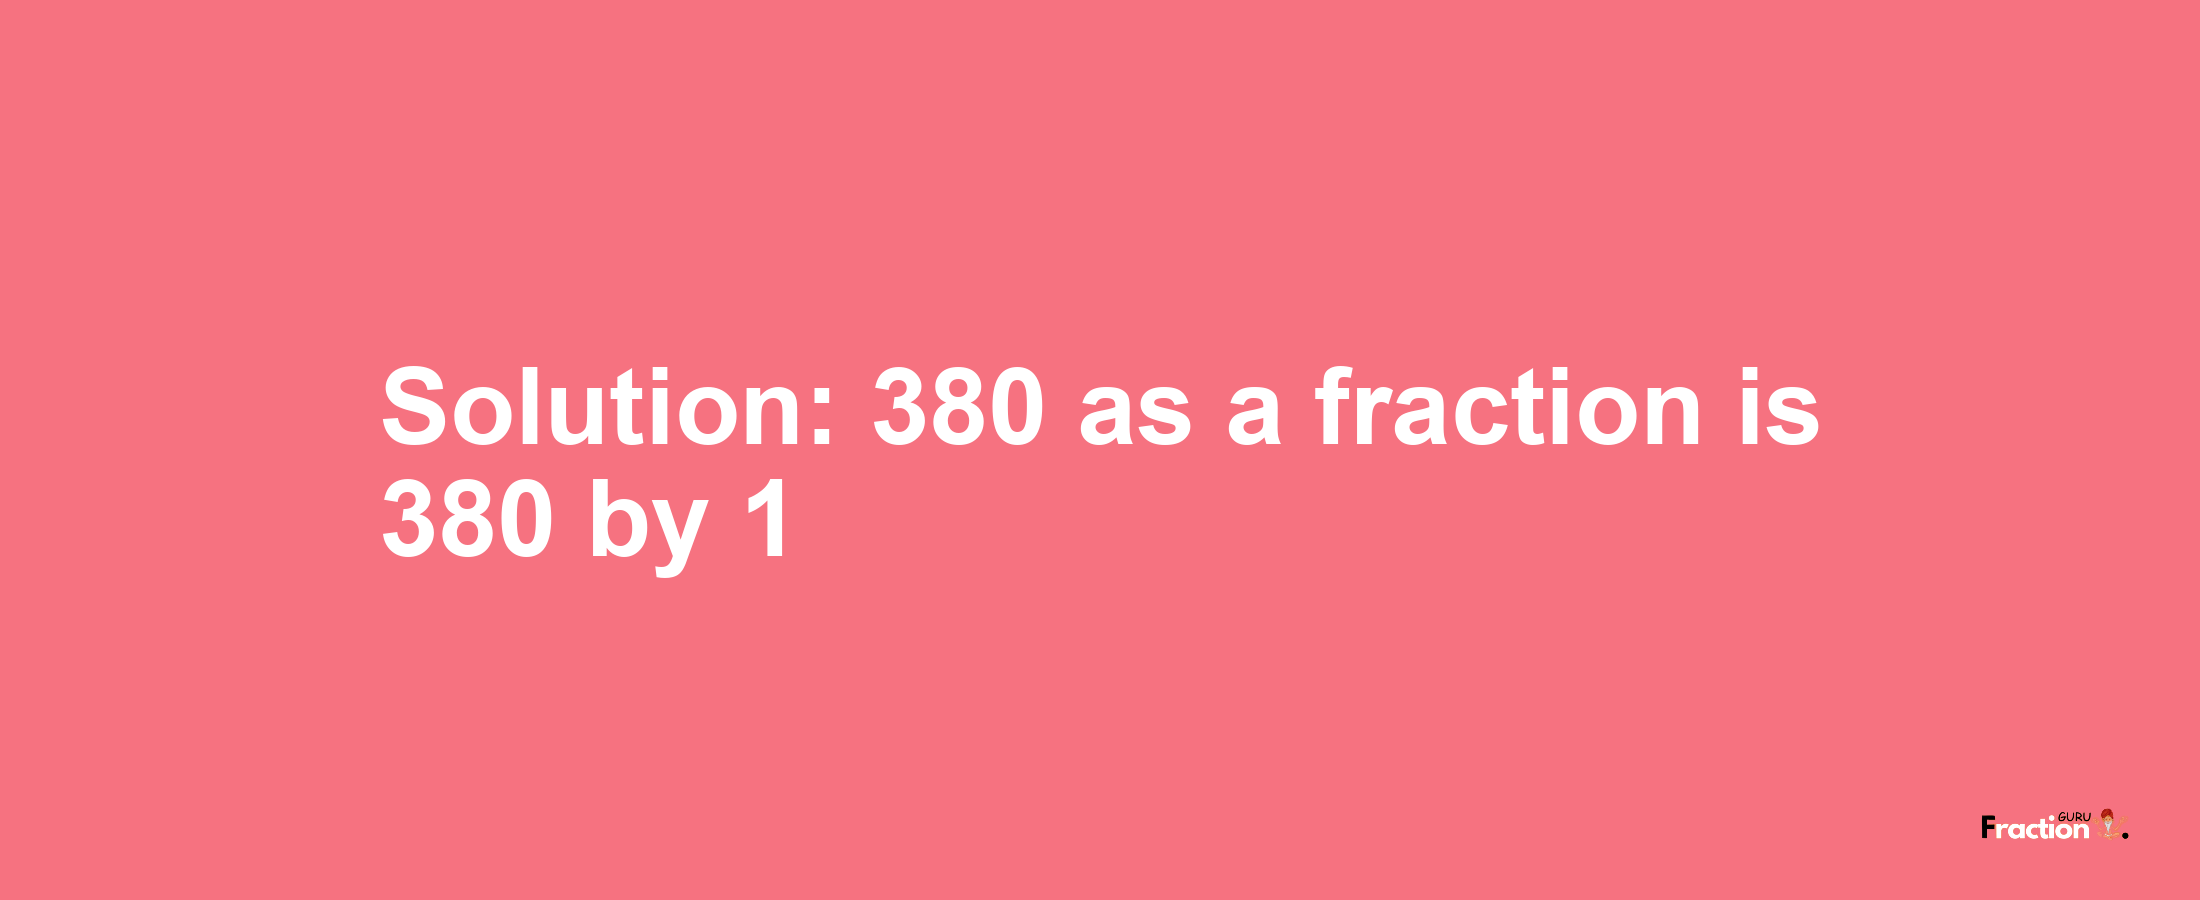 Solution:380 as a fraction is 380/1